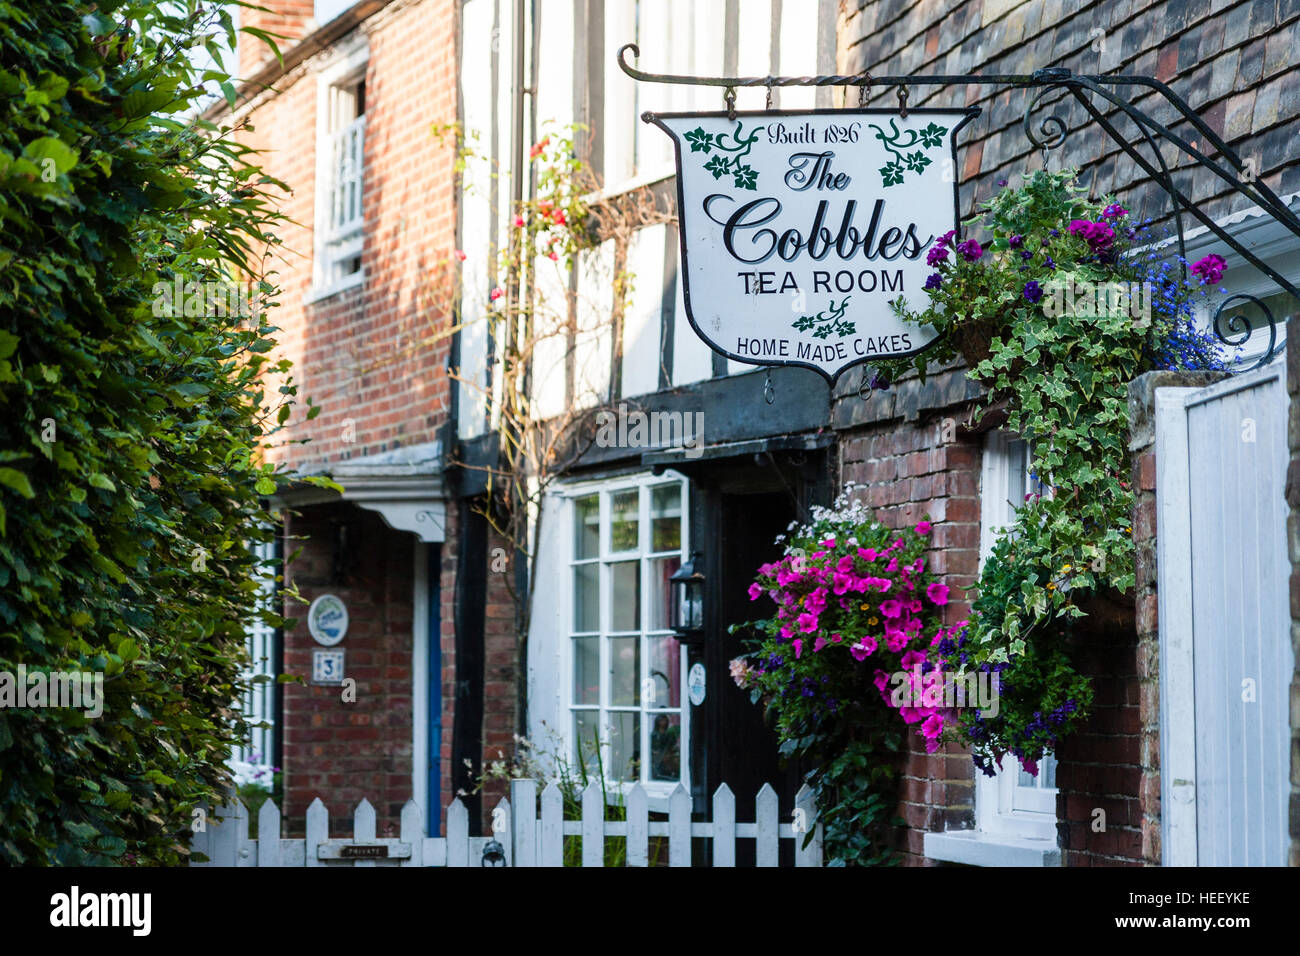 England, Rye. View along Terraced row of brick houses built around 1840 with the sign for the 'Cobbles Tea Room'. Sunshine, daytime. Stock Photo